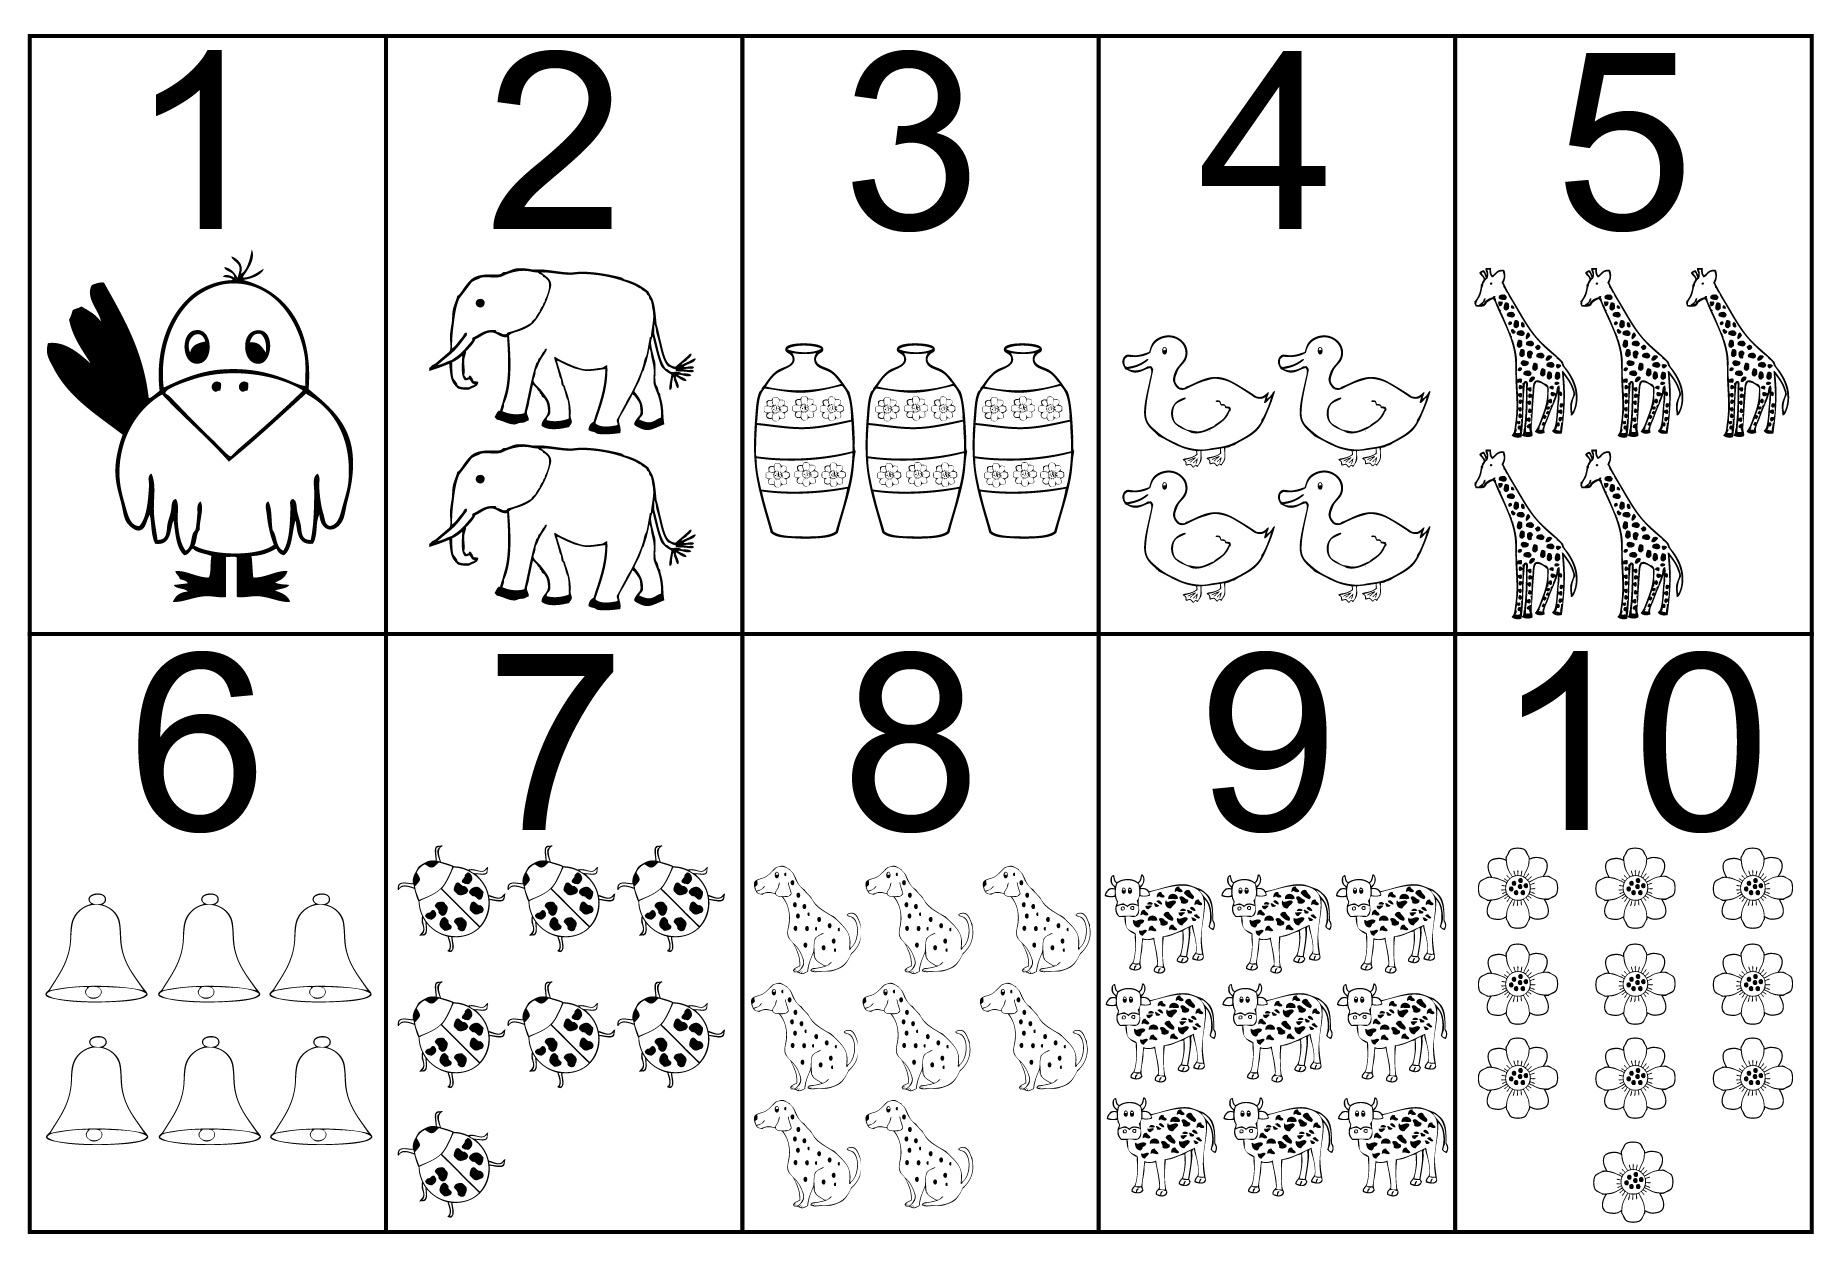 Cartoon Puppy Coloring The Number for kids, animal coloring pages printables free - Puppy coloring pages, Dog coloring page, Animal coloring books